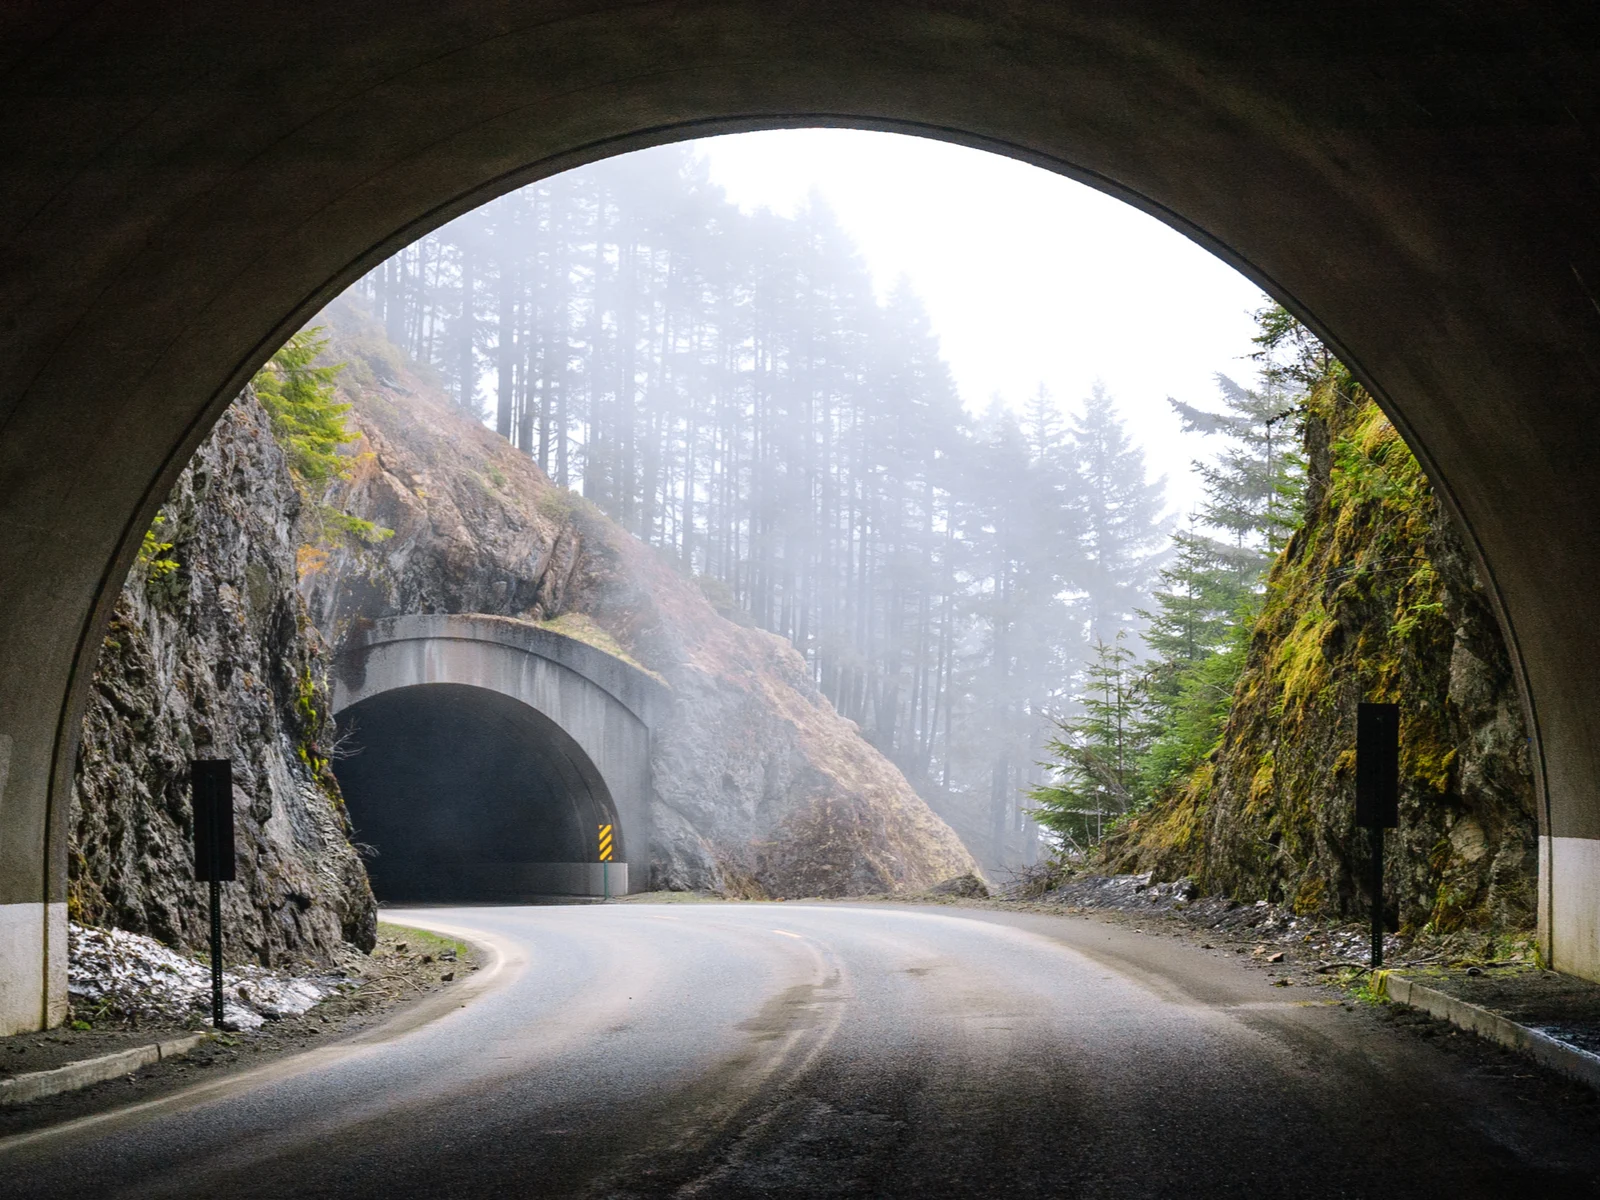 Tunnel under the mountain on a rainy day during the worst time to visit Olympic National Park